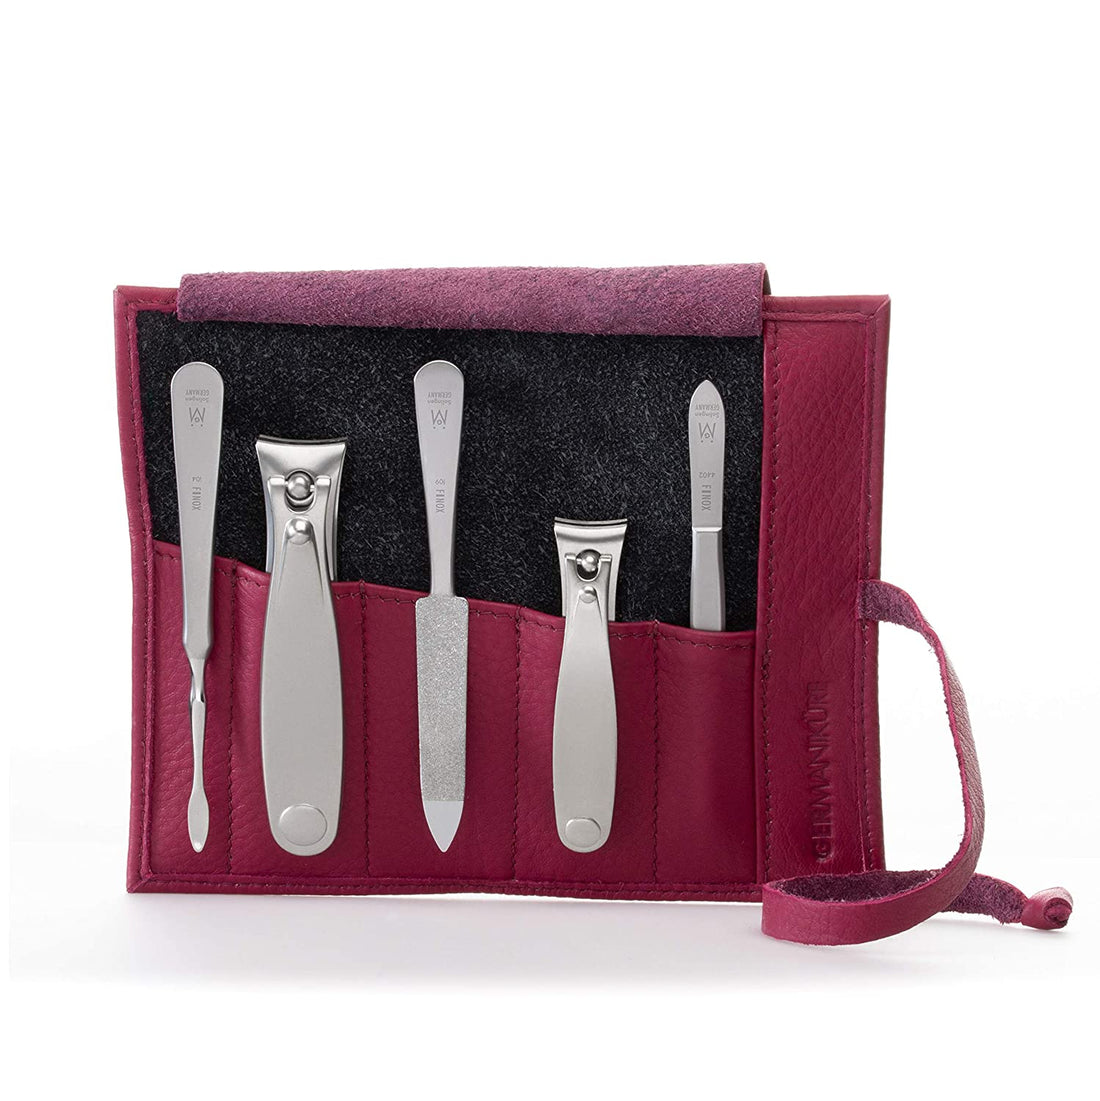 5pc Manicure & Pedicure Set in Leather Roll